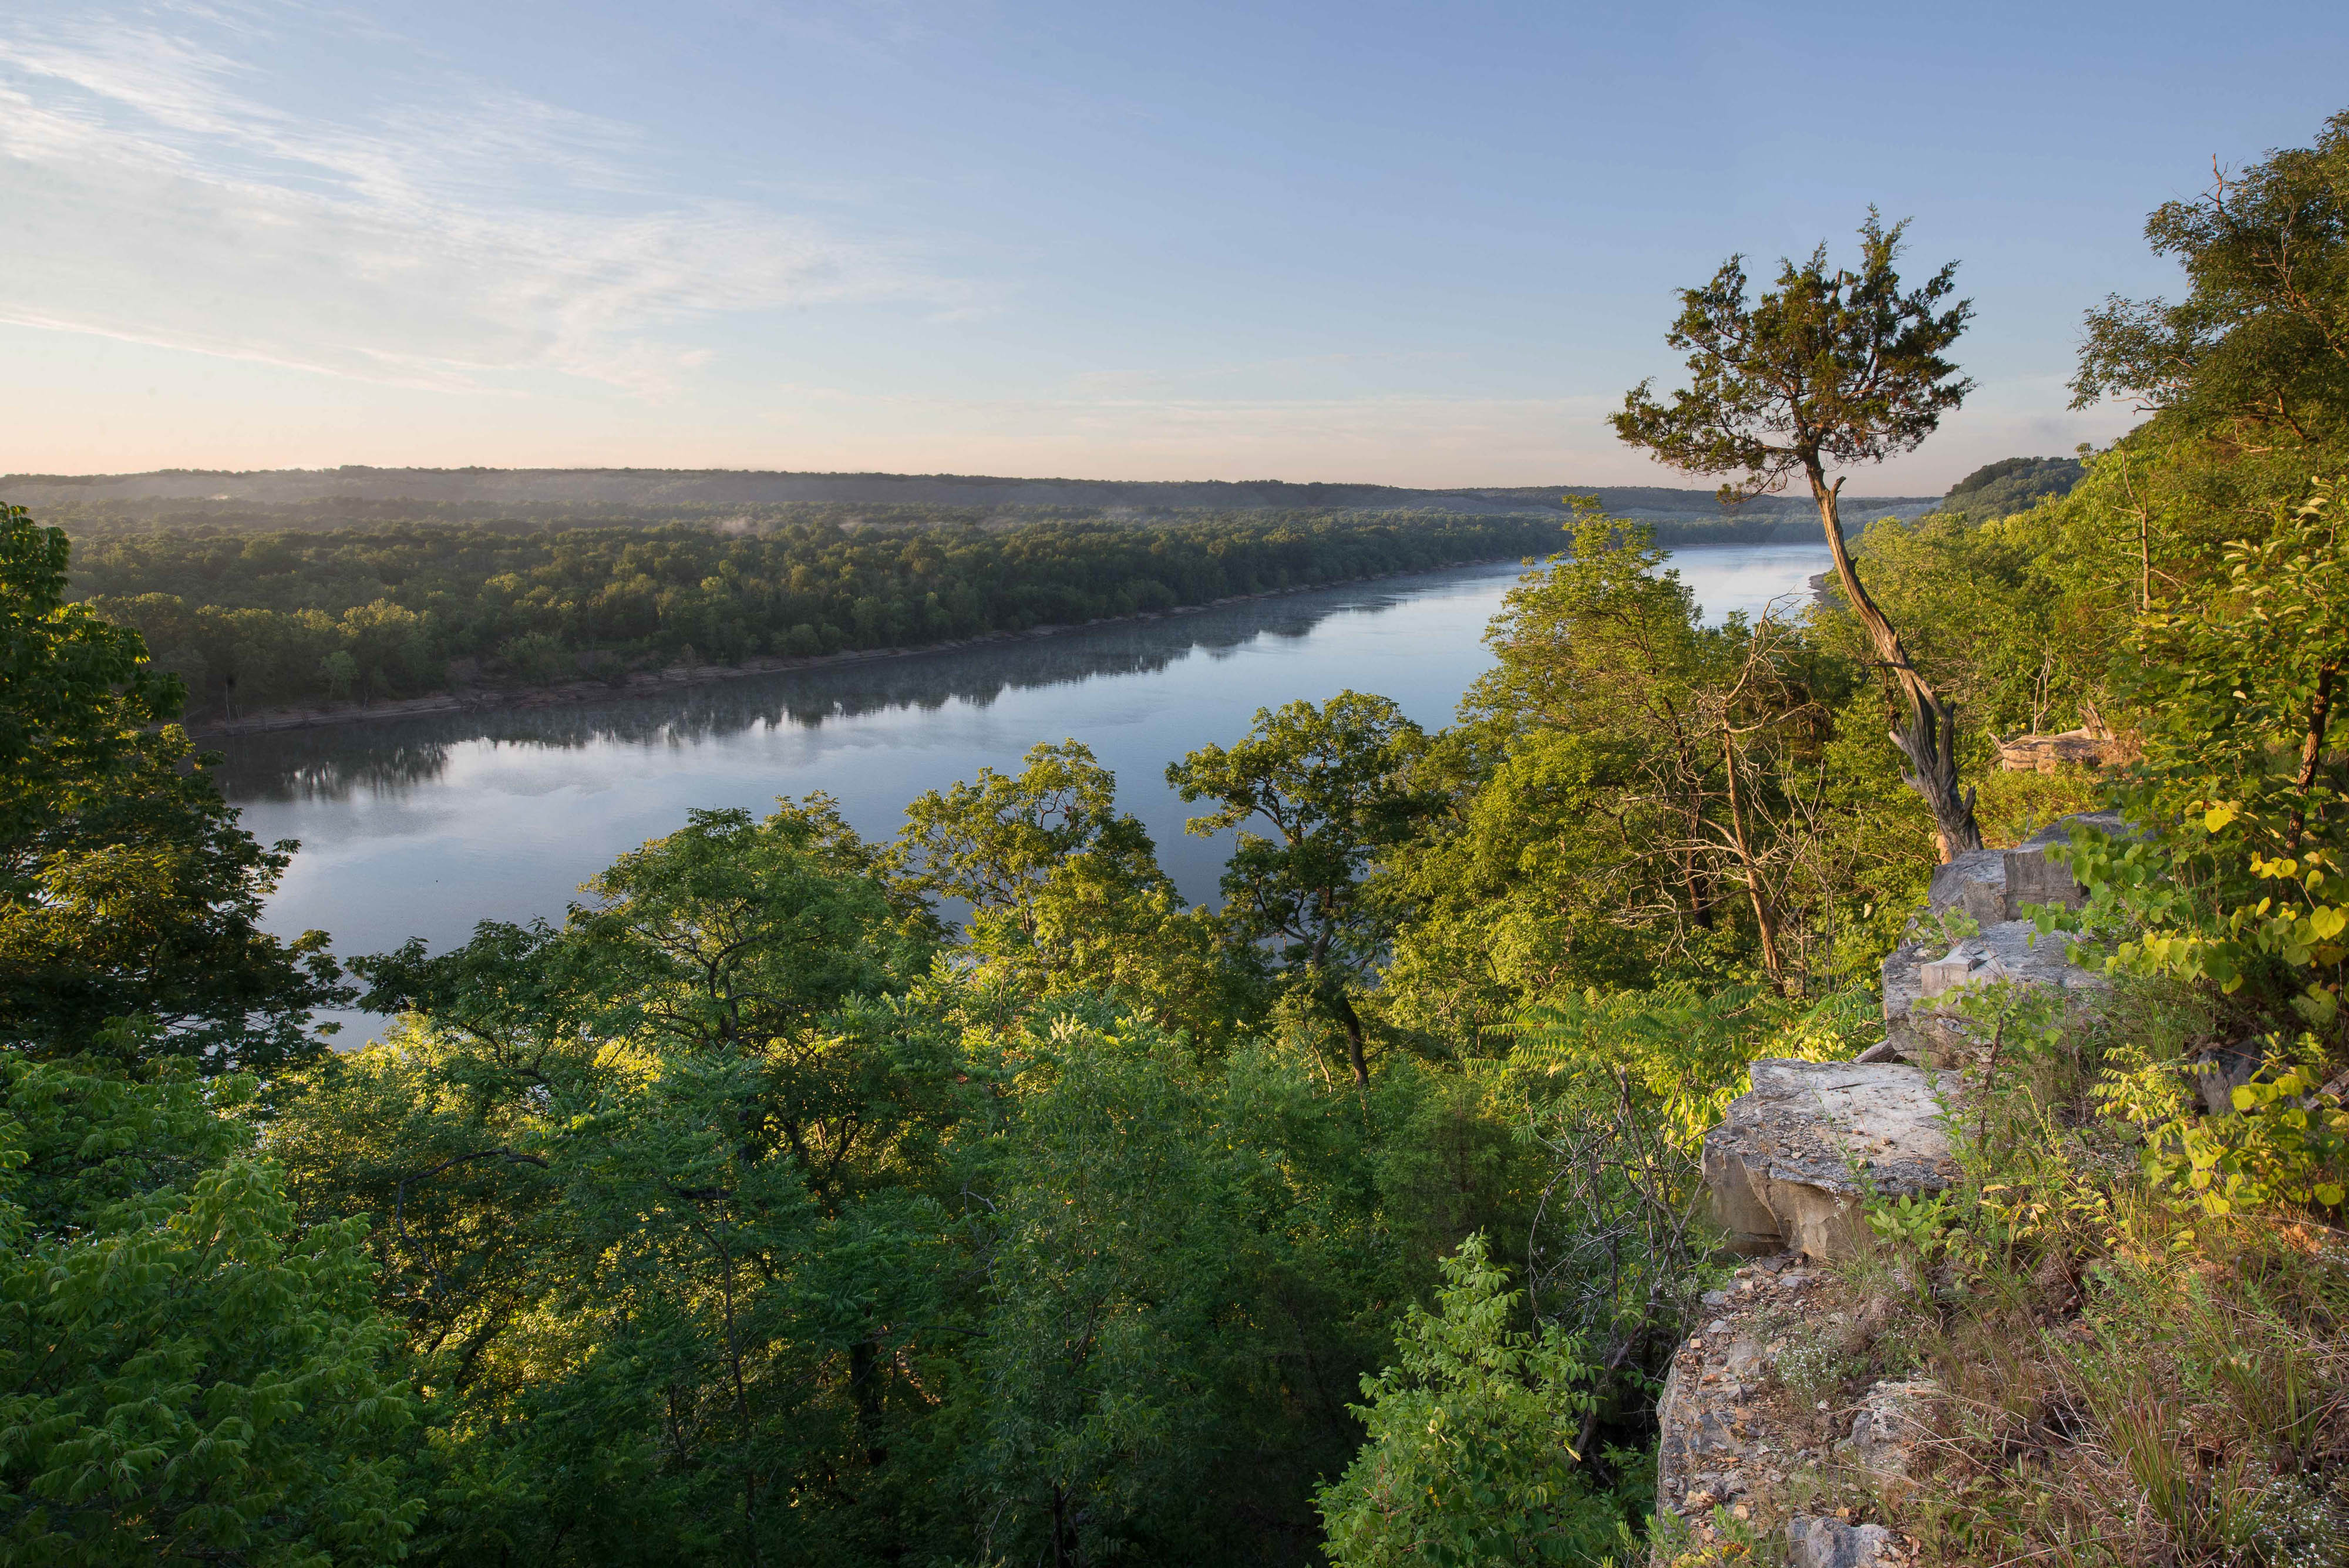 High cliff overlooking river.